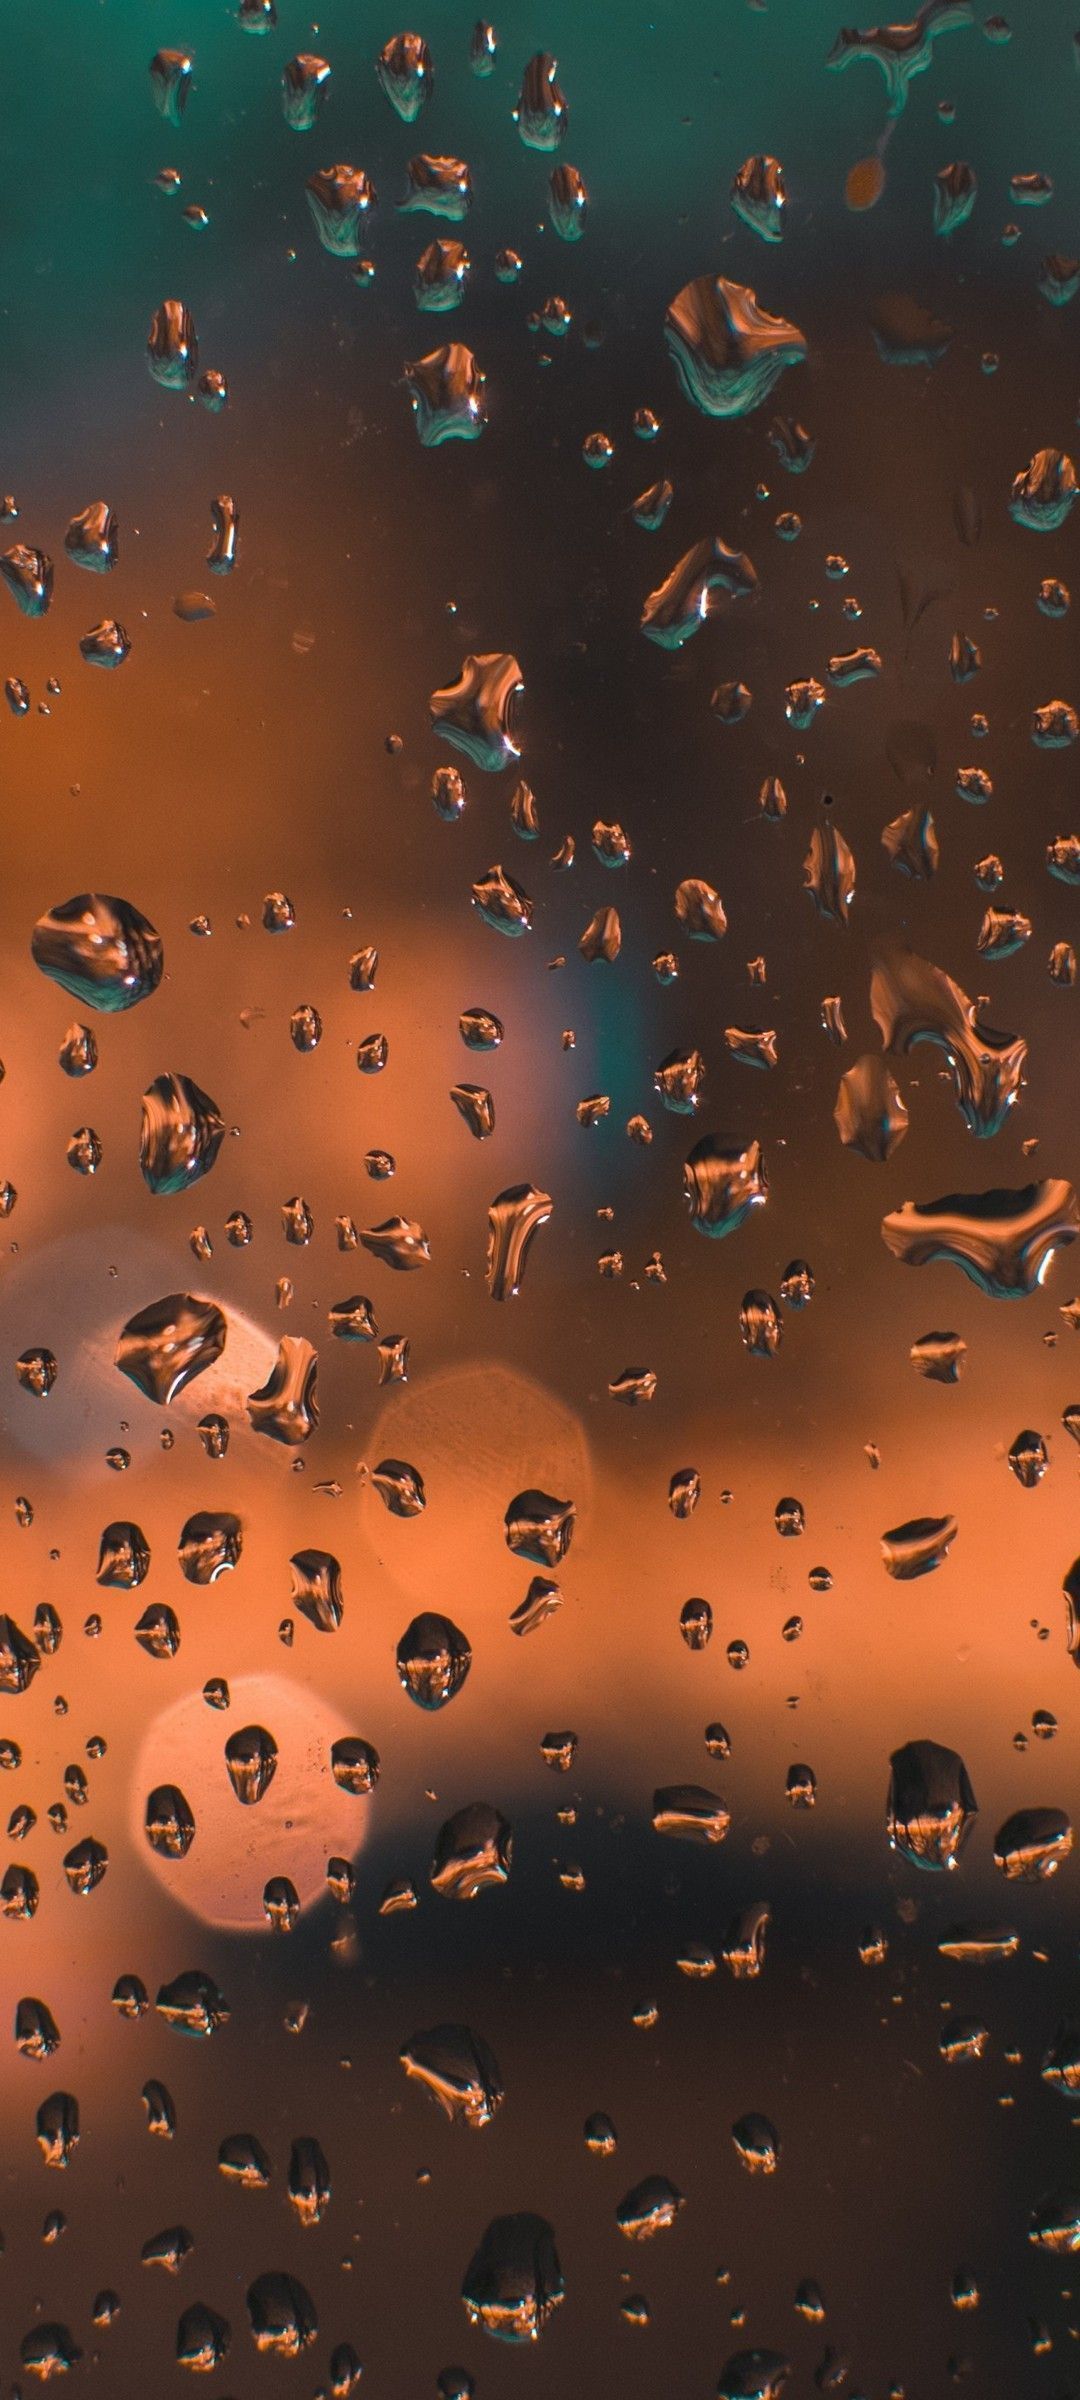 A close up of rain drops on the window - 1080x2400